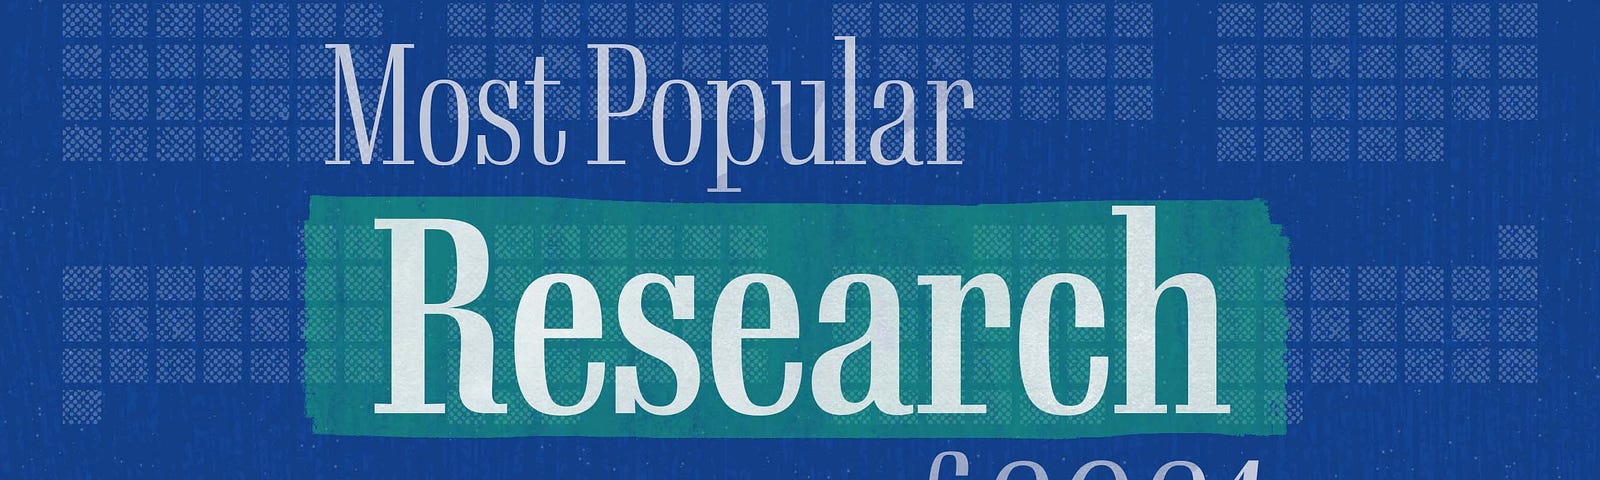 Most popular research of 2021